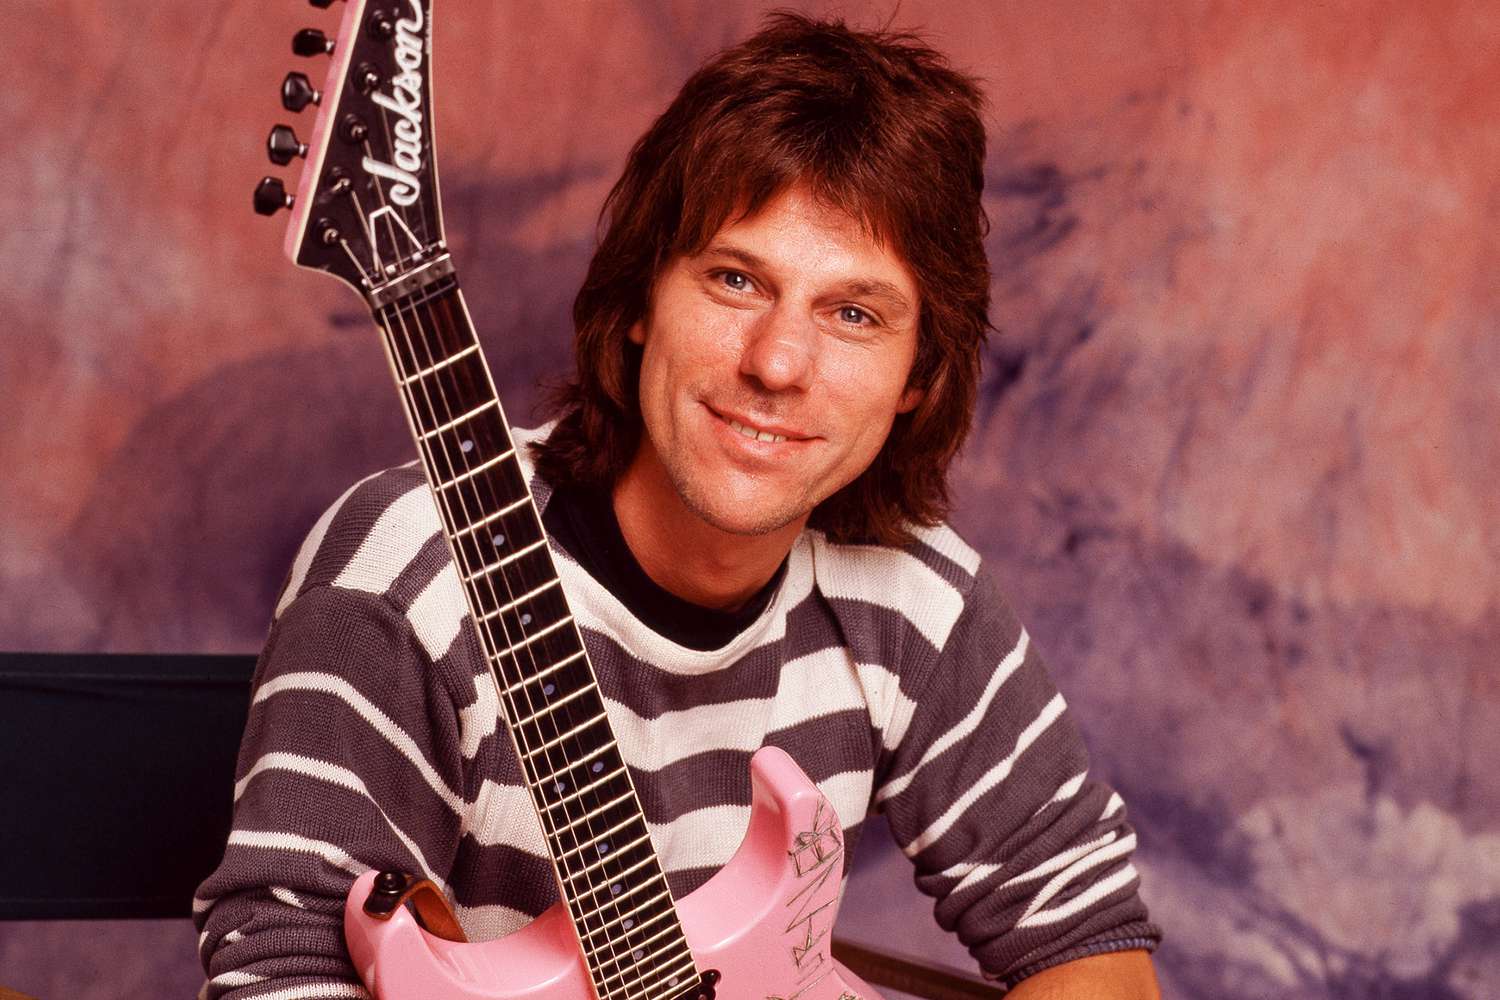 Jeff Beck Biography: Wife, Net Worth, Age, Height, Songs, Instagram, Children, Wikipedia, Death